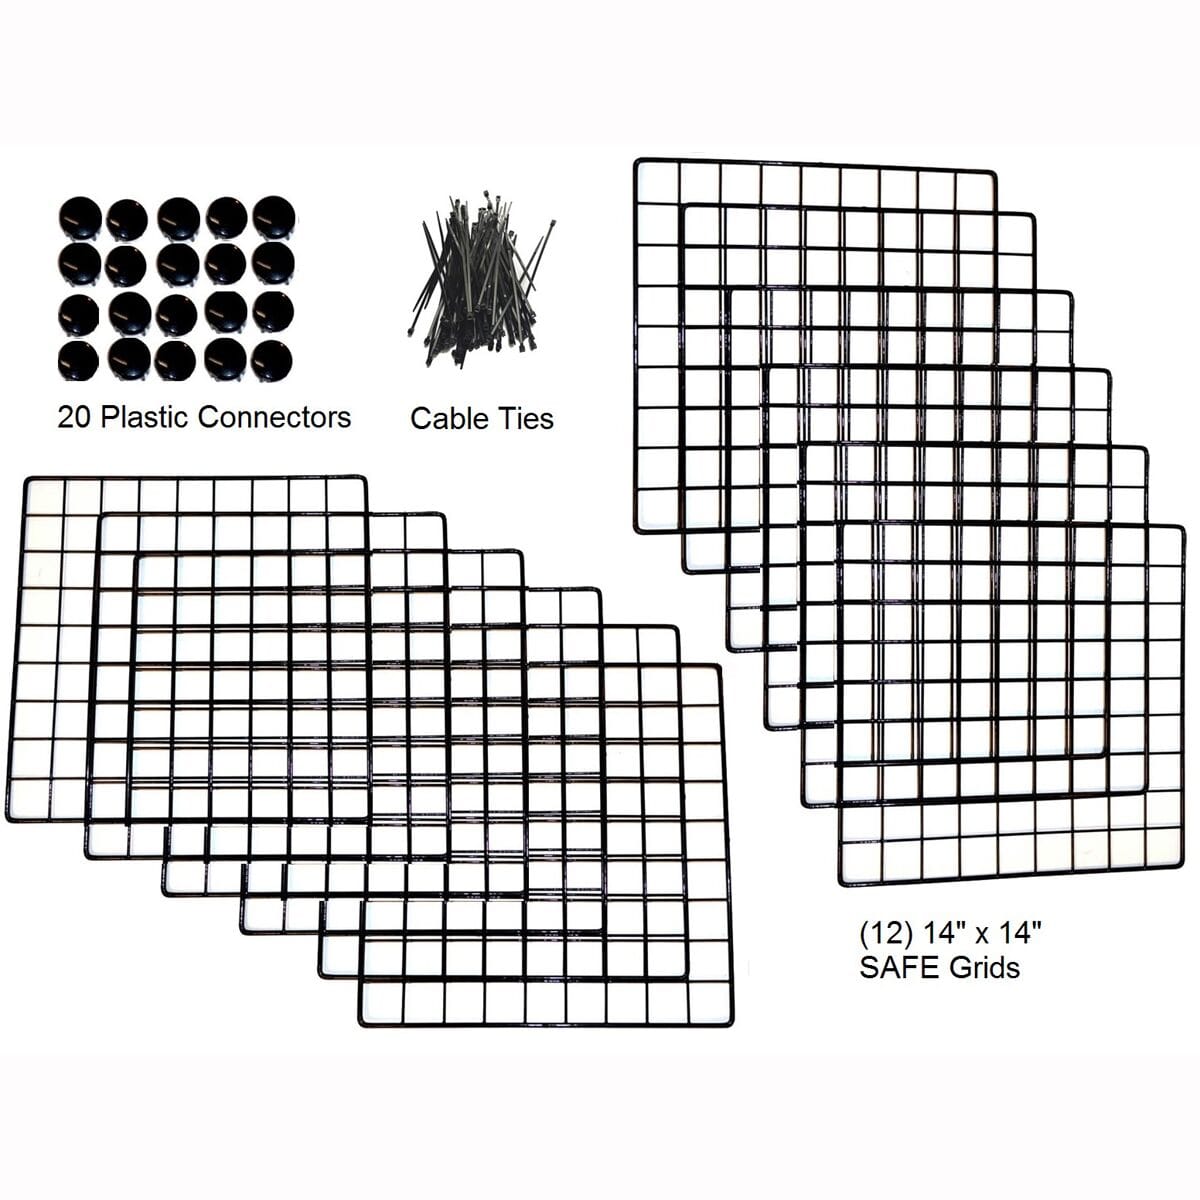 Twelve black grids, 20 black connectors and cable ties for a medium C&C guinea pig cage